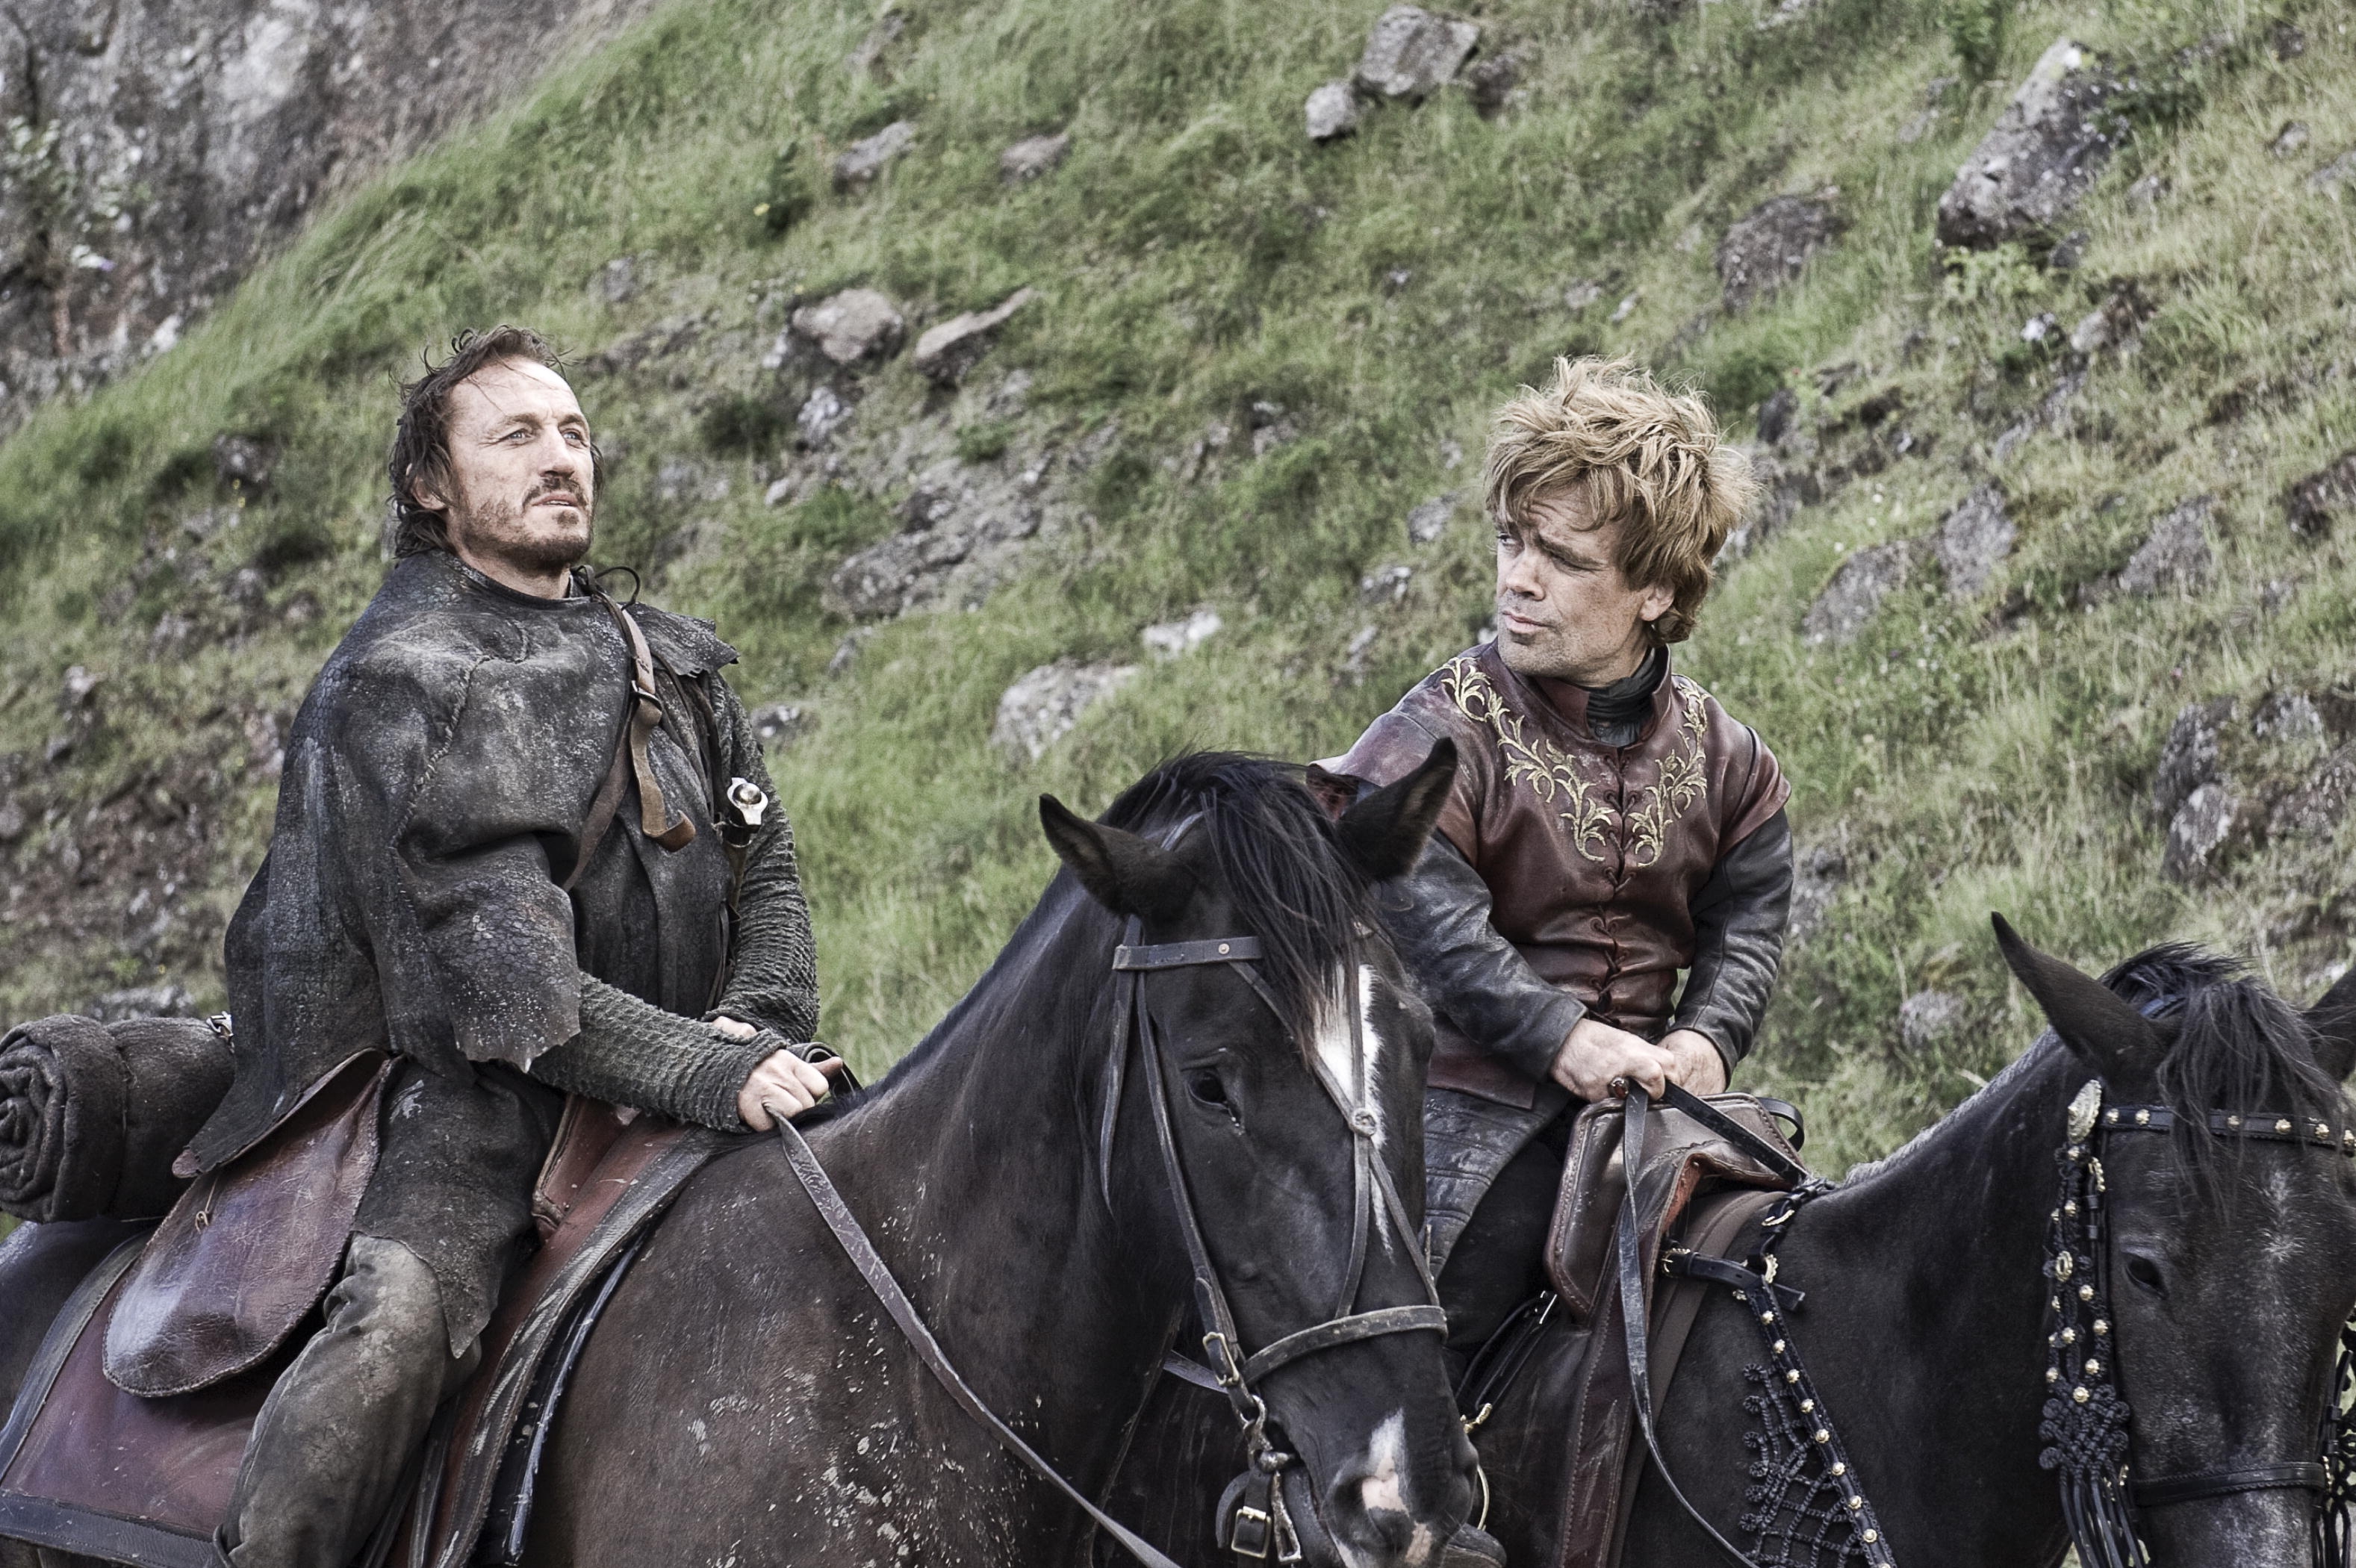 Horses Game Of Thrones Tyrion Lannister Peter Dinklage - HD Wallpaper 